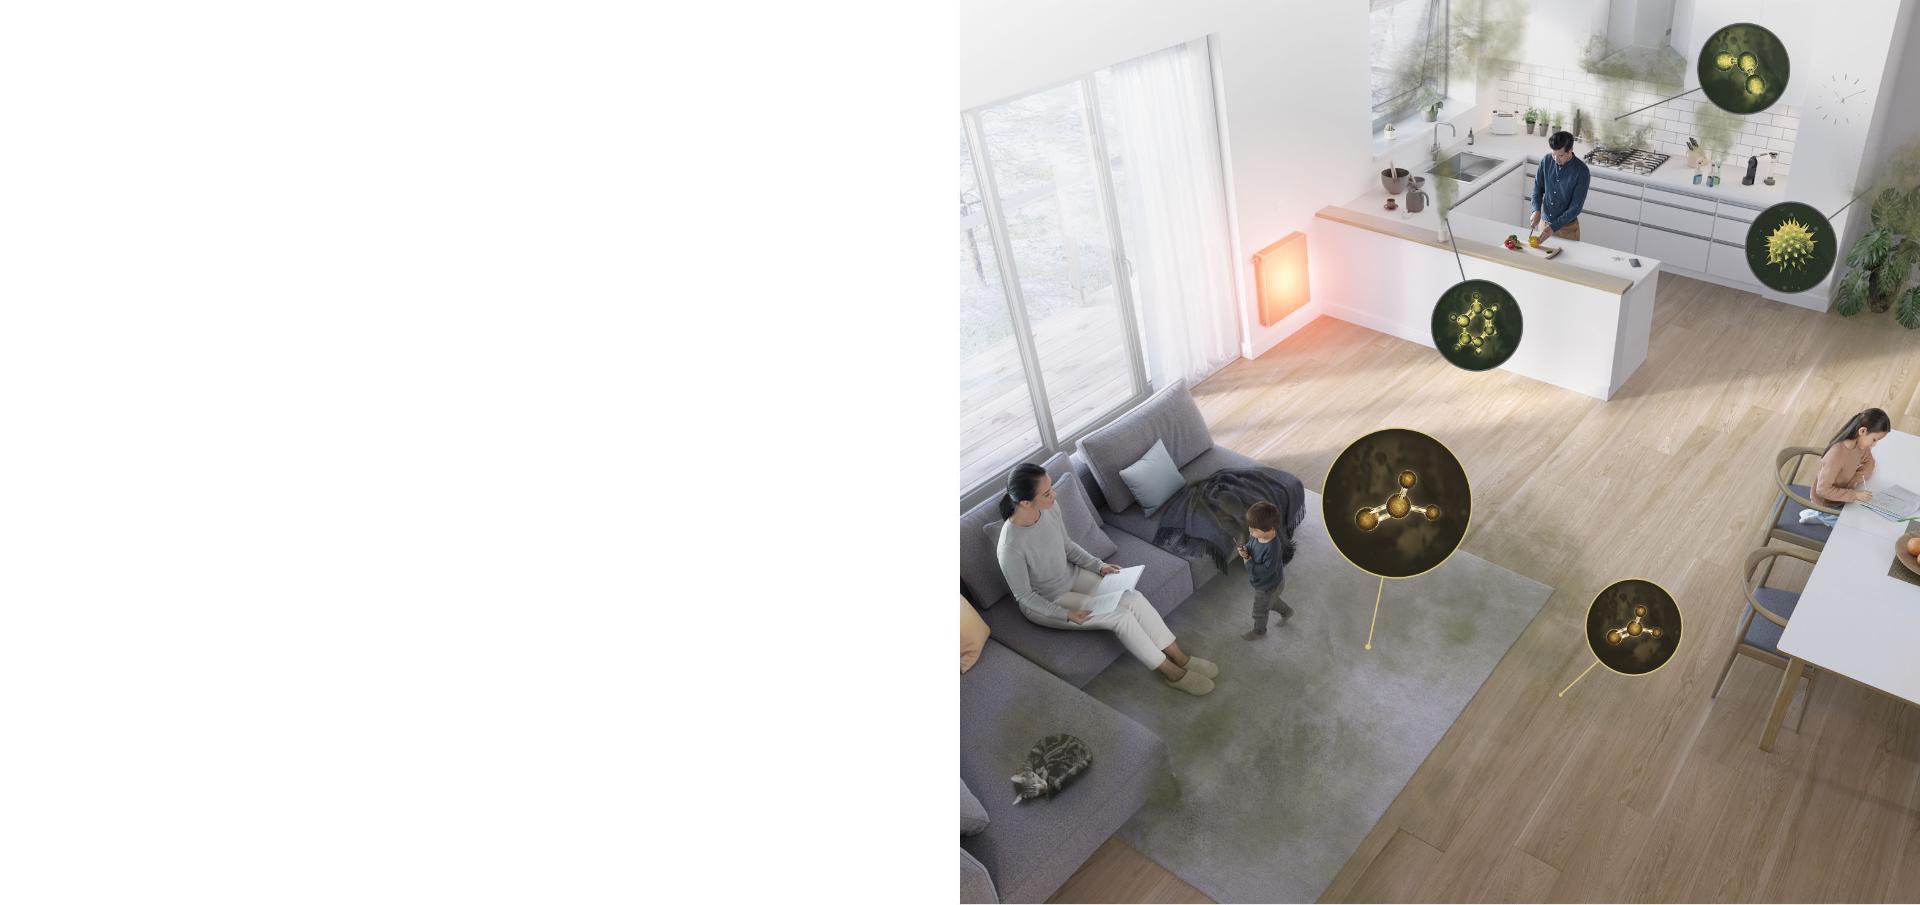 Aerial view of living space with the Dyson purifier humidifier